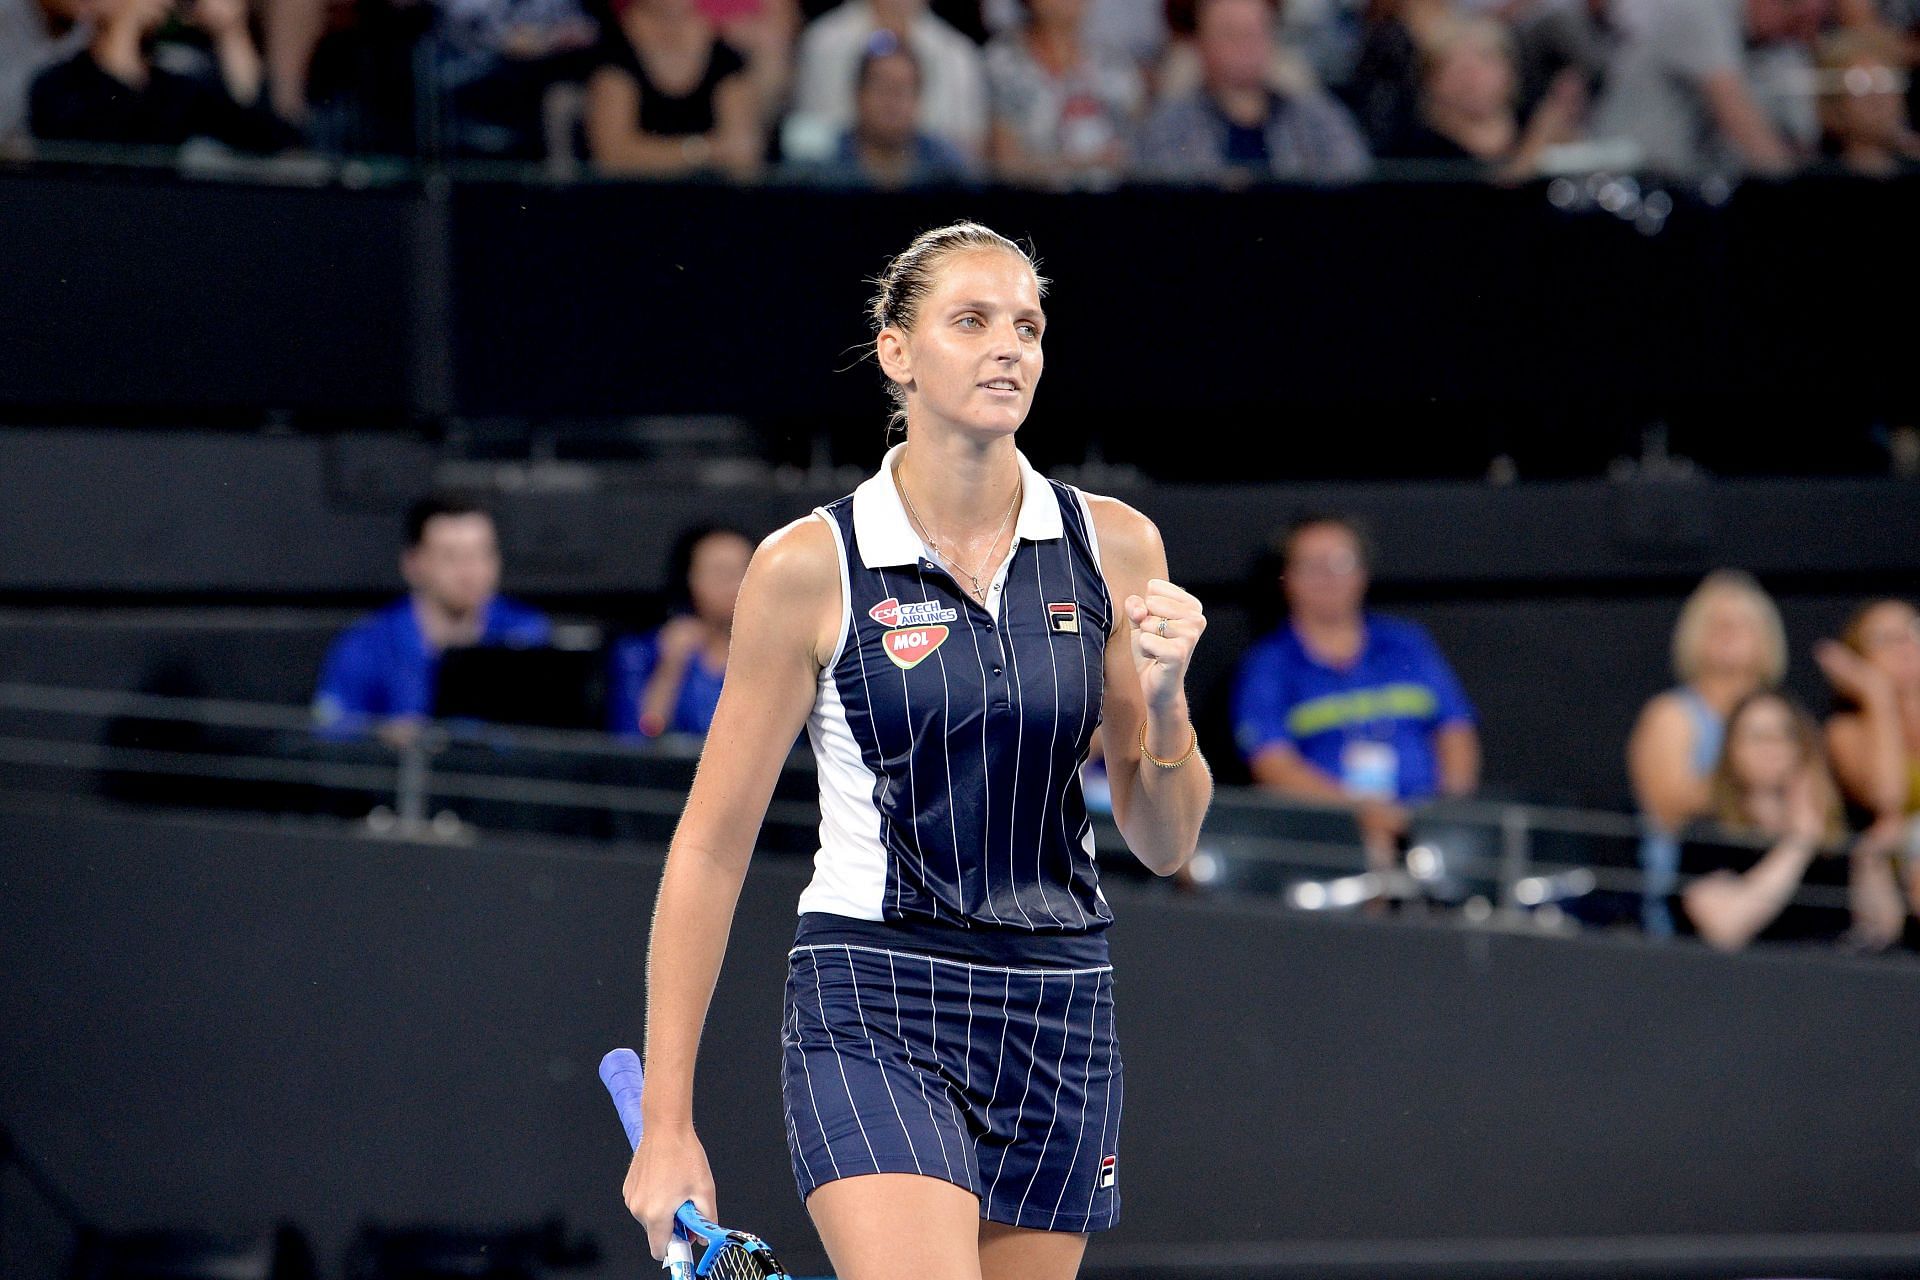 Pliskova has been one of the most consistent players during the US Open Swing this year.